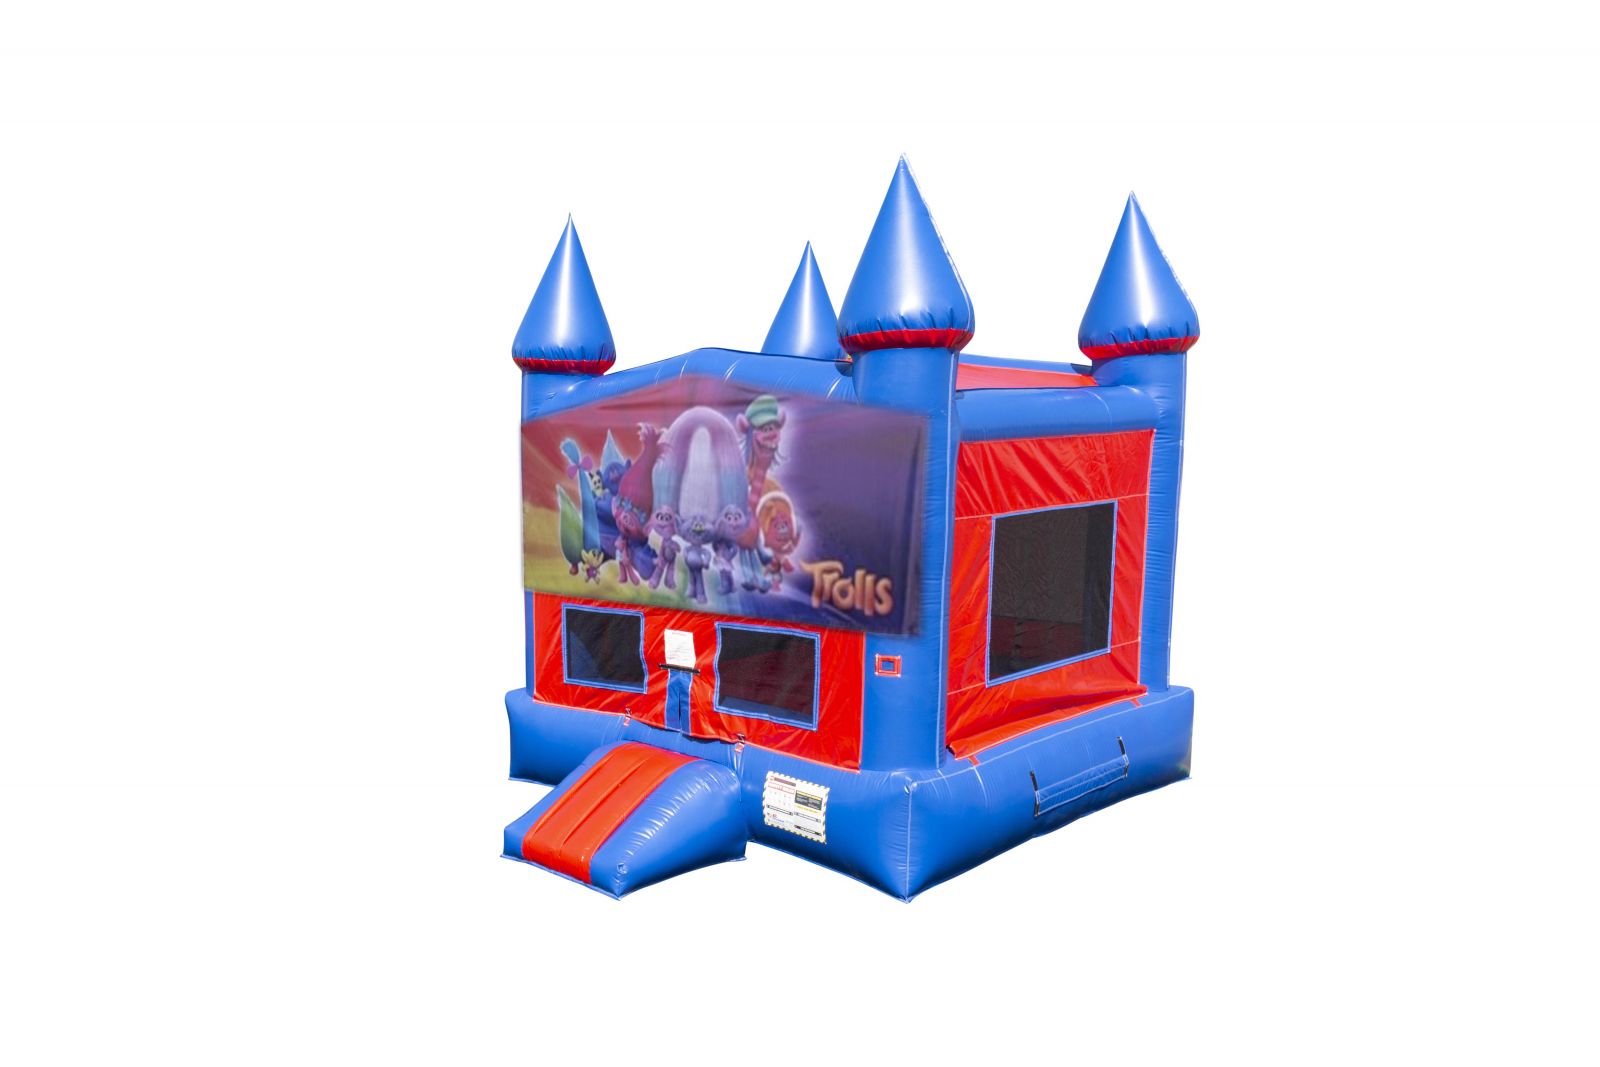 Trolls Blue and Red Bounce House